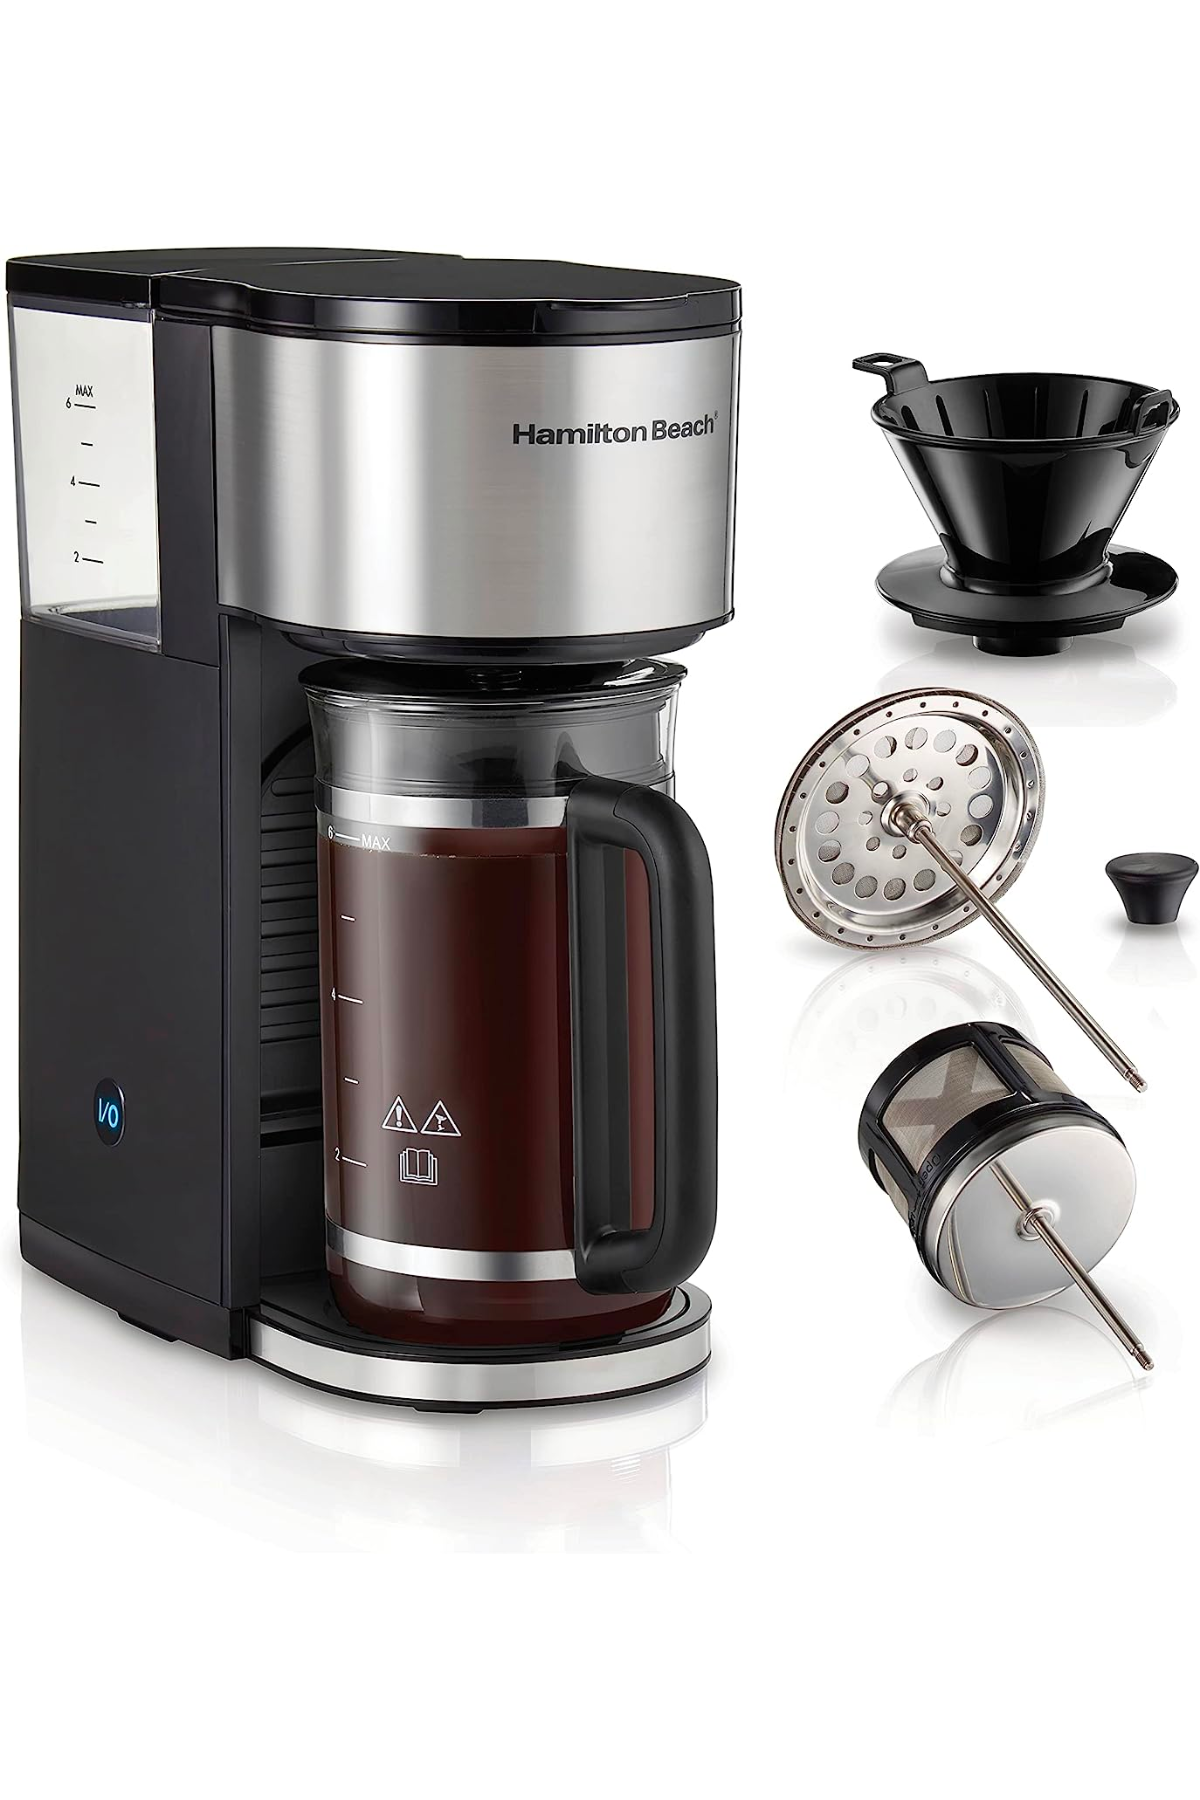 Hamilton Beach Home Barista 7-in-1 Coffee Maker with Seven Ways to Brew, 6 Cup Carafe, Drip, Single Serve, French Press, Pour Over, Cold Brew, Easy-Fill...